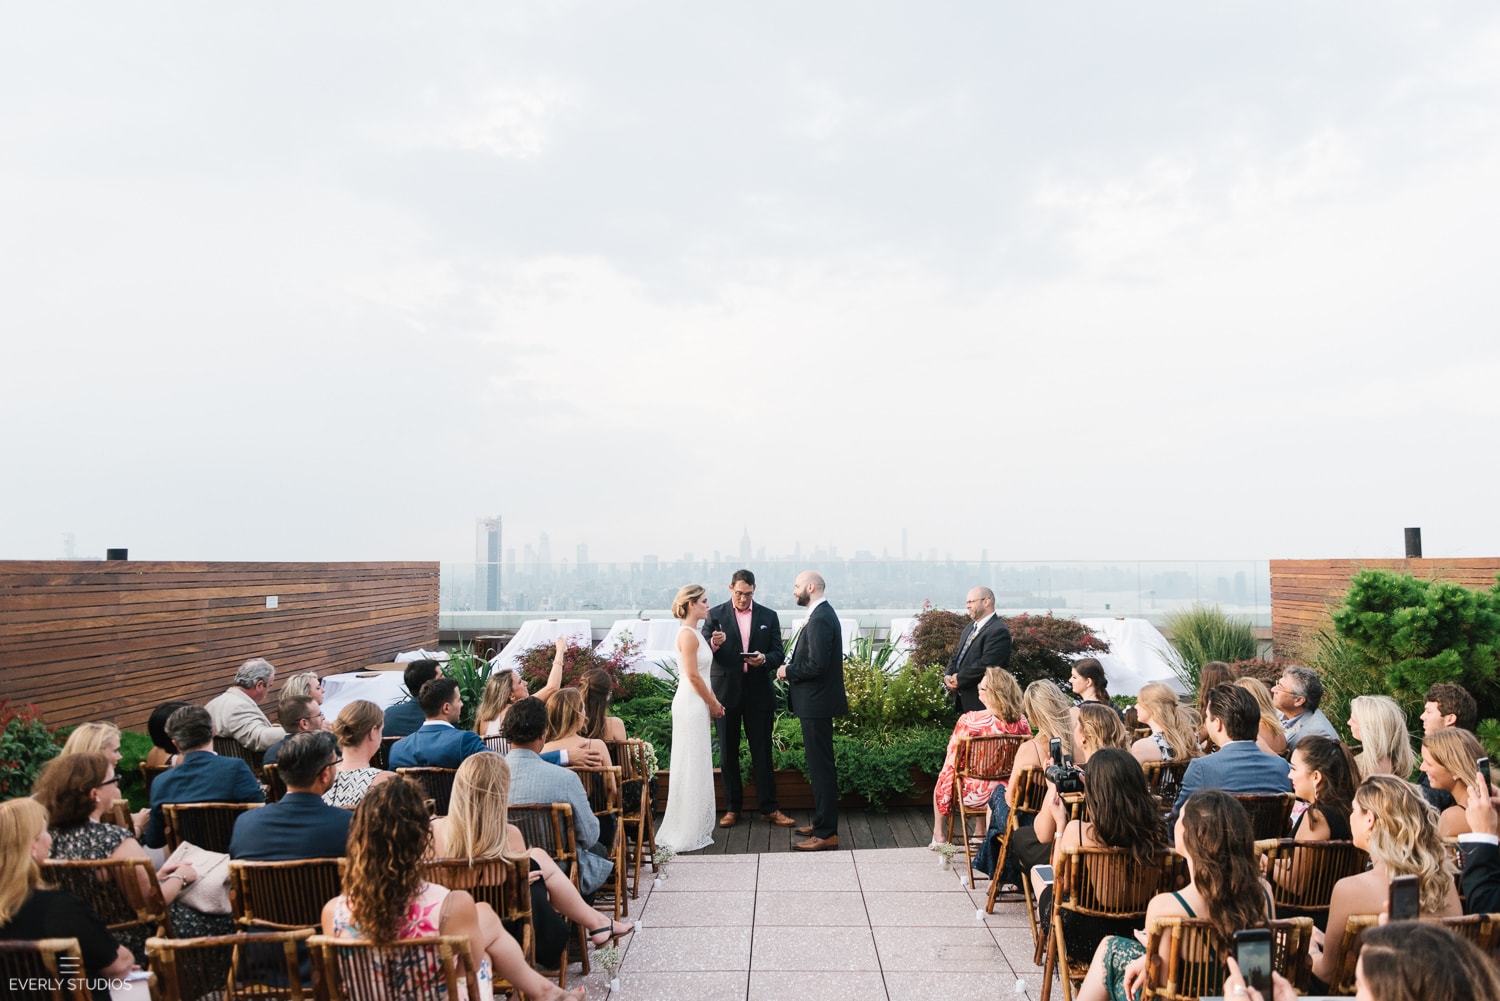 Rooftop wedding NYC in Brooklyn with views of Manhattan. Wedding photos by NYC wedding photographer Everly Studios, www.everlystudios.com